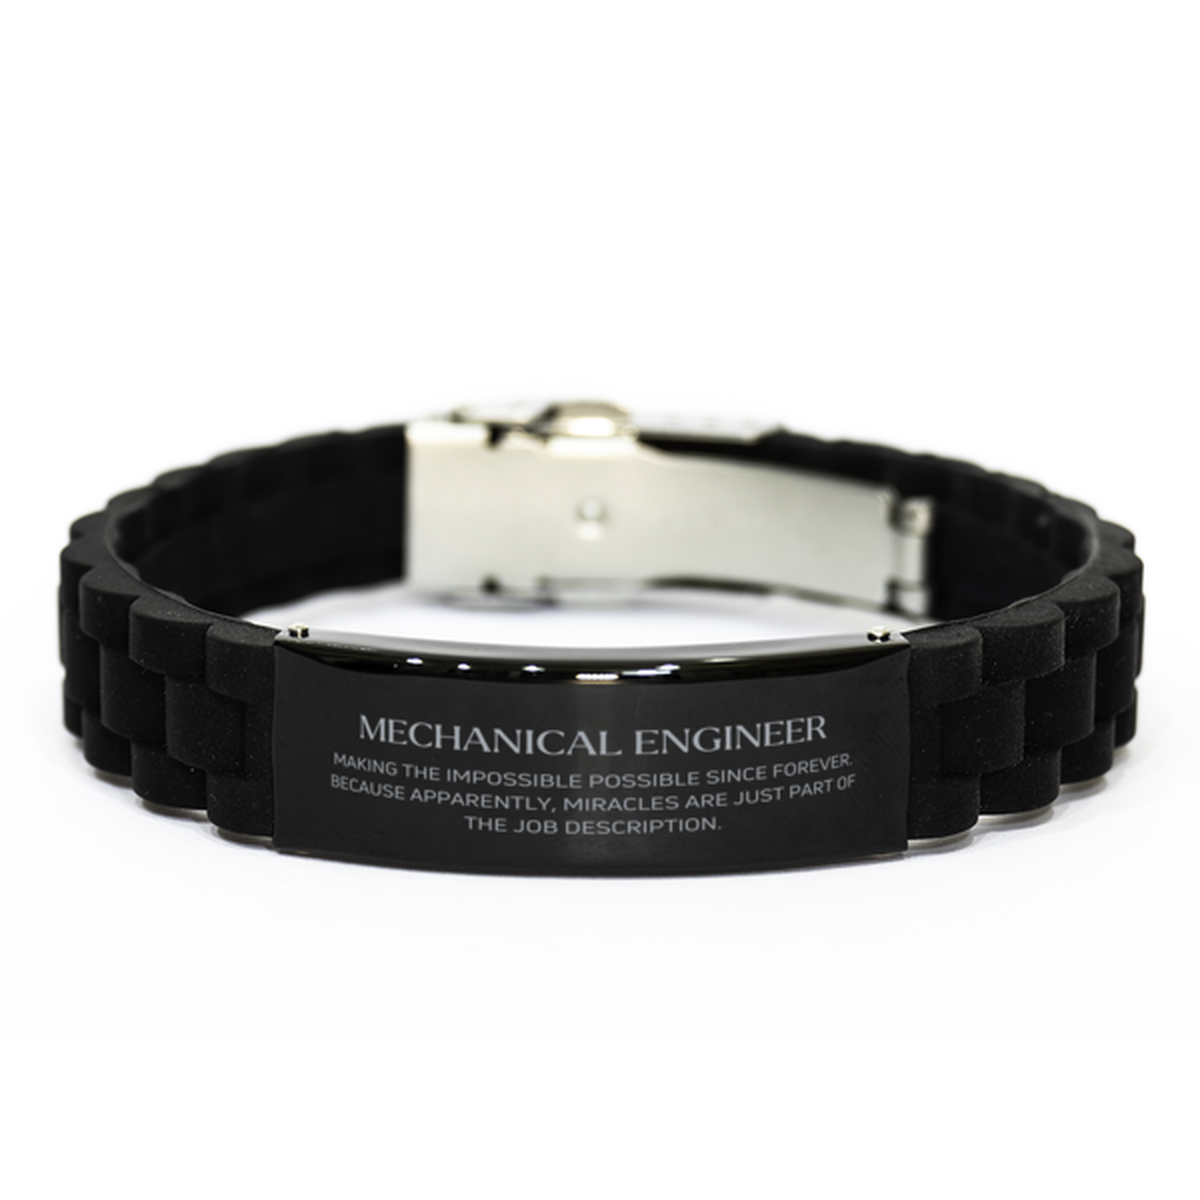 Funny Mechanical Engineer Gifts, Miracles are just part of the job description, Inspirational Birthday Black Glidelock Clasp Bracelet For Mechanical Engineer, Men, Women, Coworkers, Friends, Boss